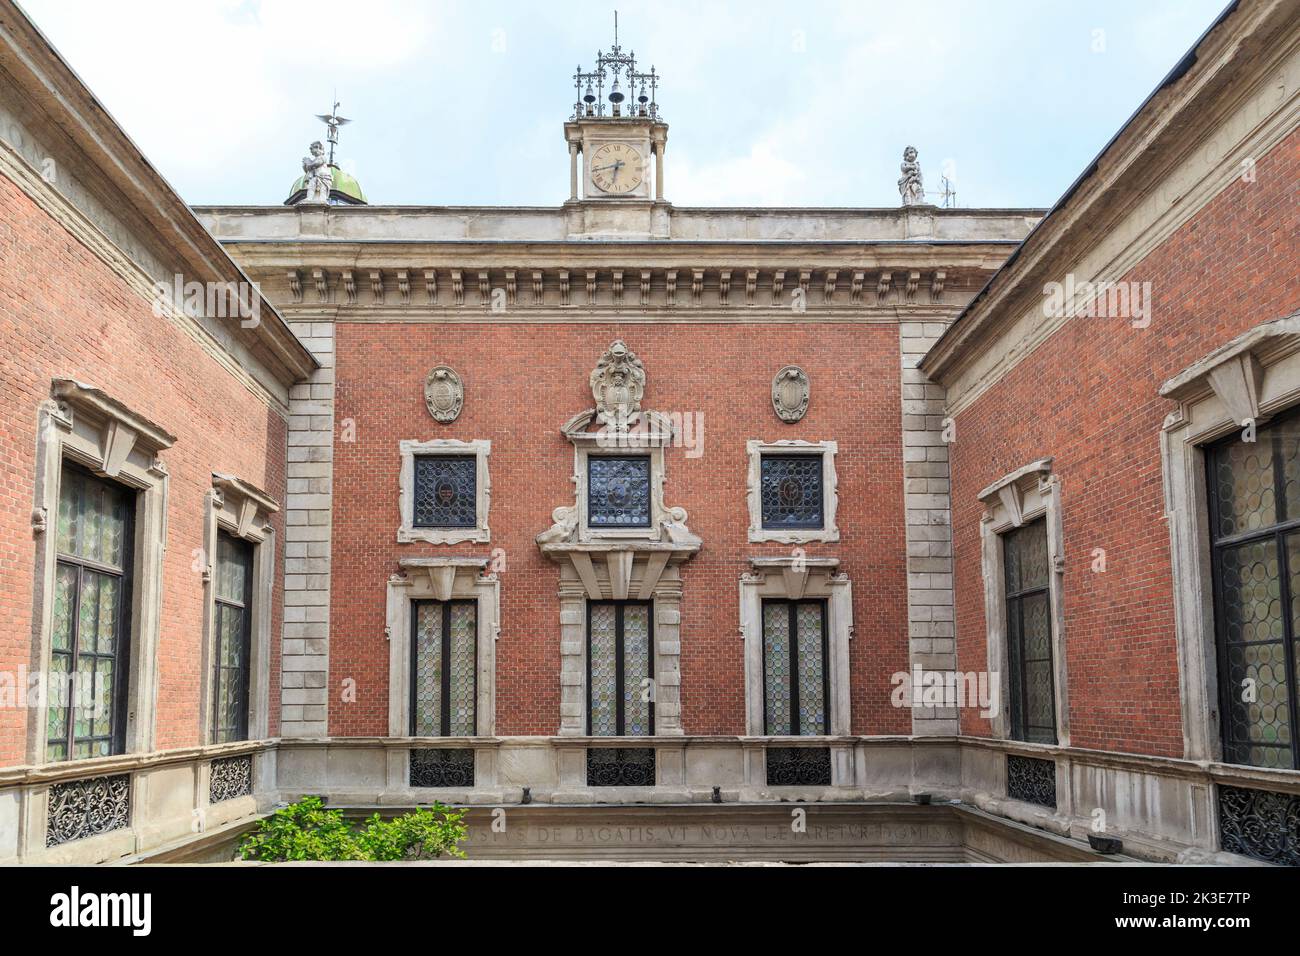 MILAN, ITALY - MAY 17, 2018: This is the facade of the mansion of Bagatti Valsecchi Museum from the inner courtyard. Stock Photo